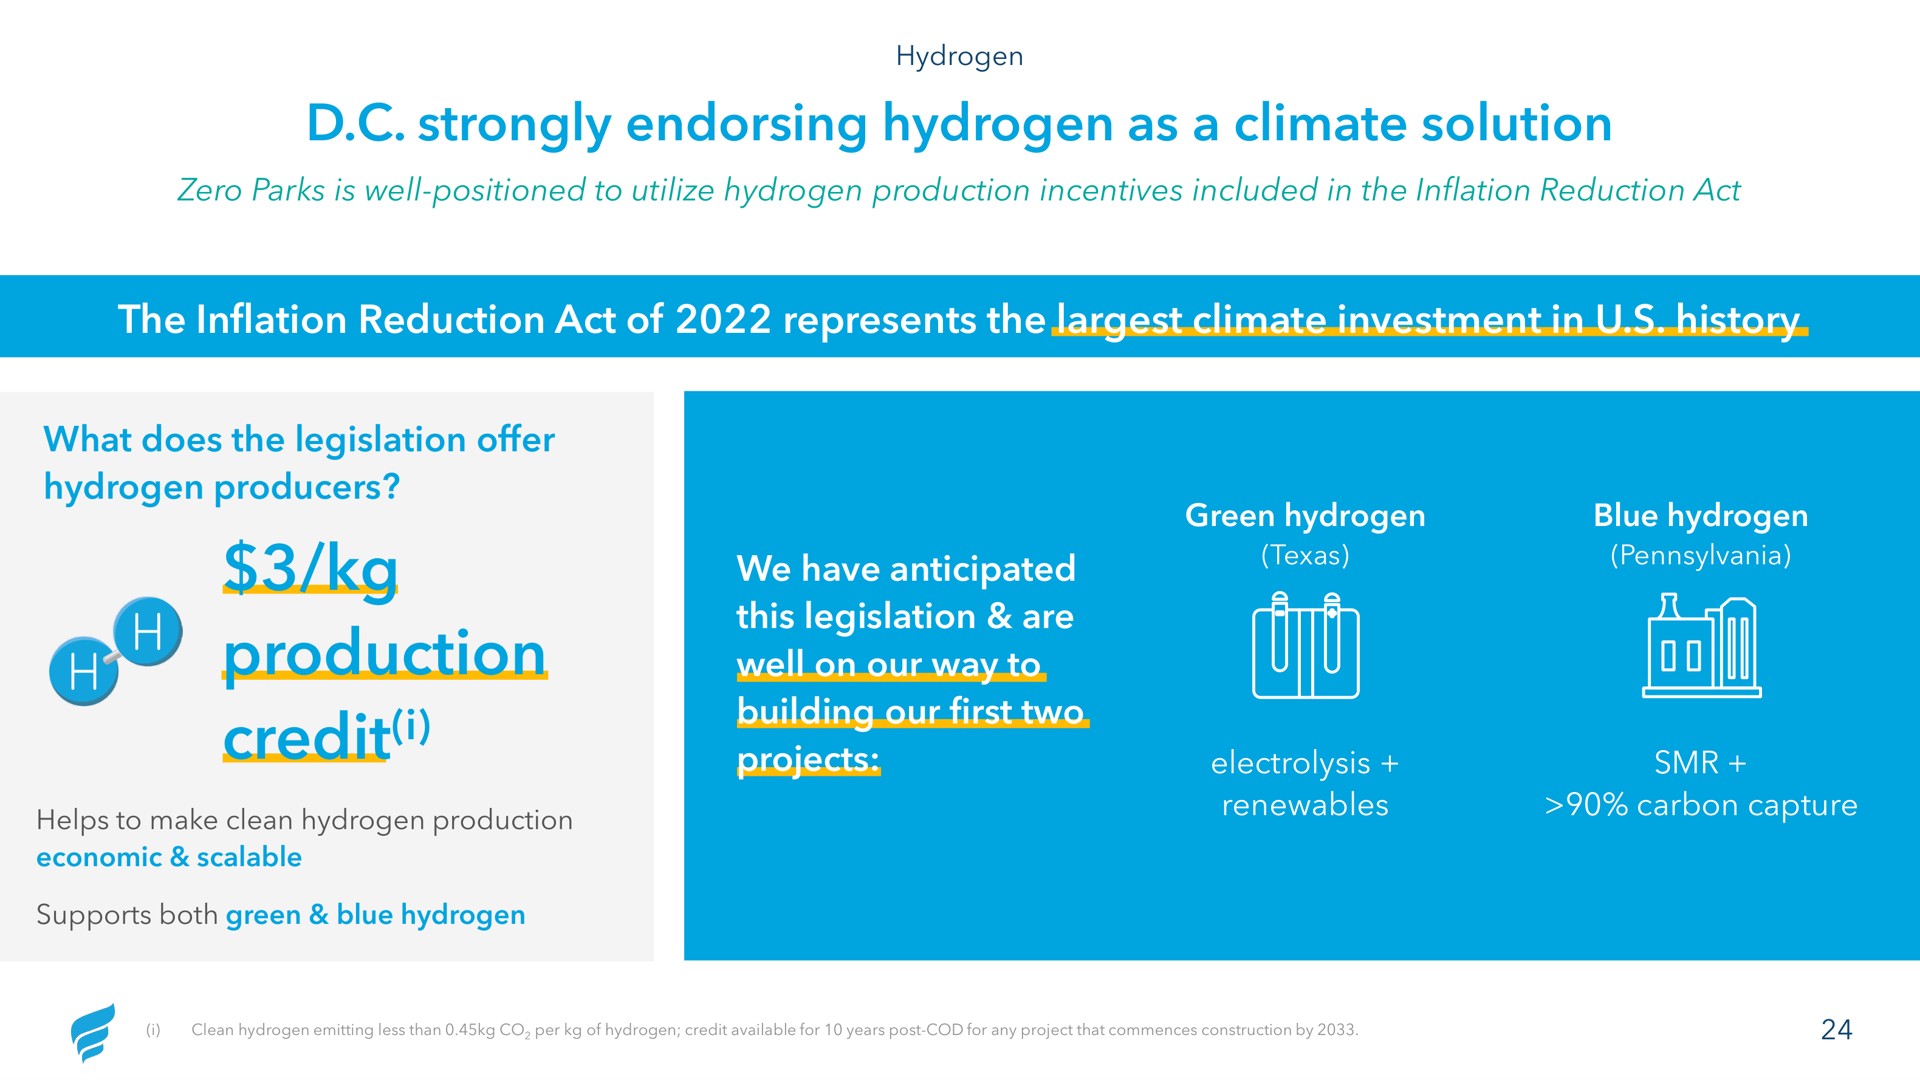 strongly endorsing hydrogen as a climate solution the inflation reduction act of represents the climate investment in history production credit i at | NewFortress Energy